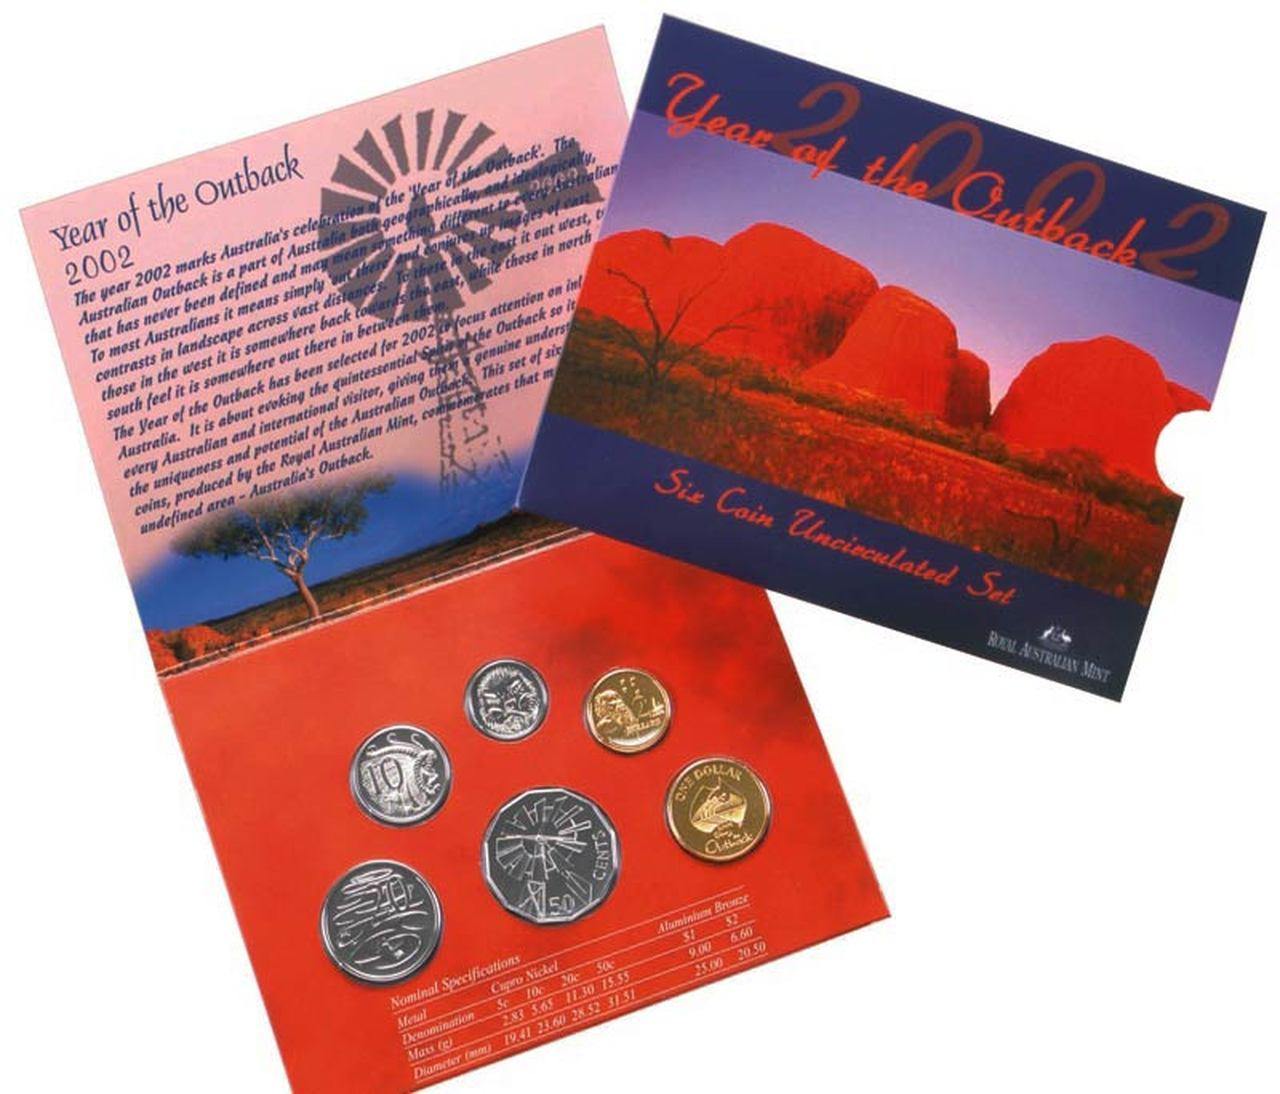 2002 Royal Australian Mint Uncirculated 6 Coin Set - Year of the Outback - Loose Change Coins